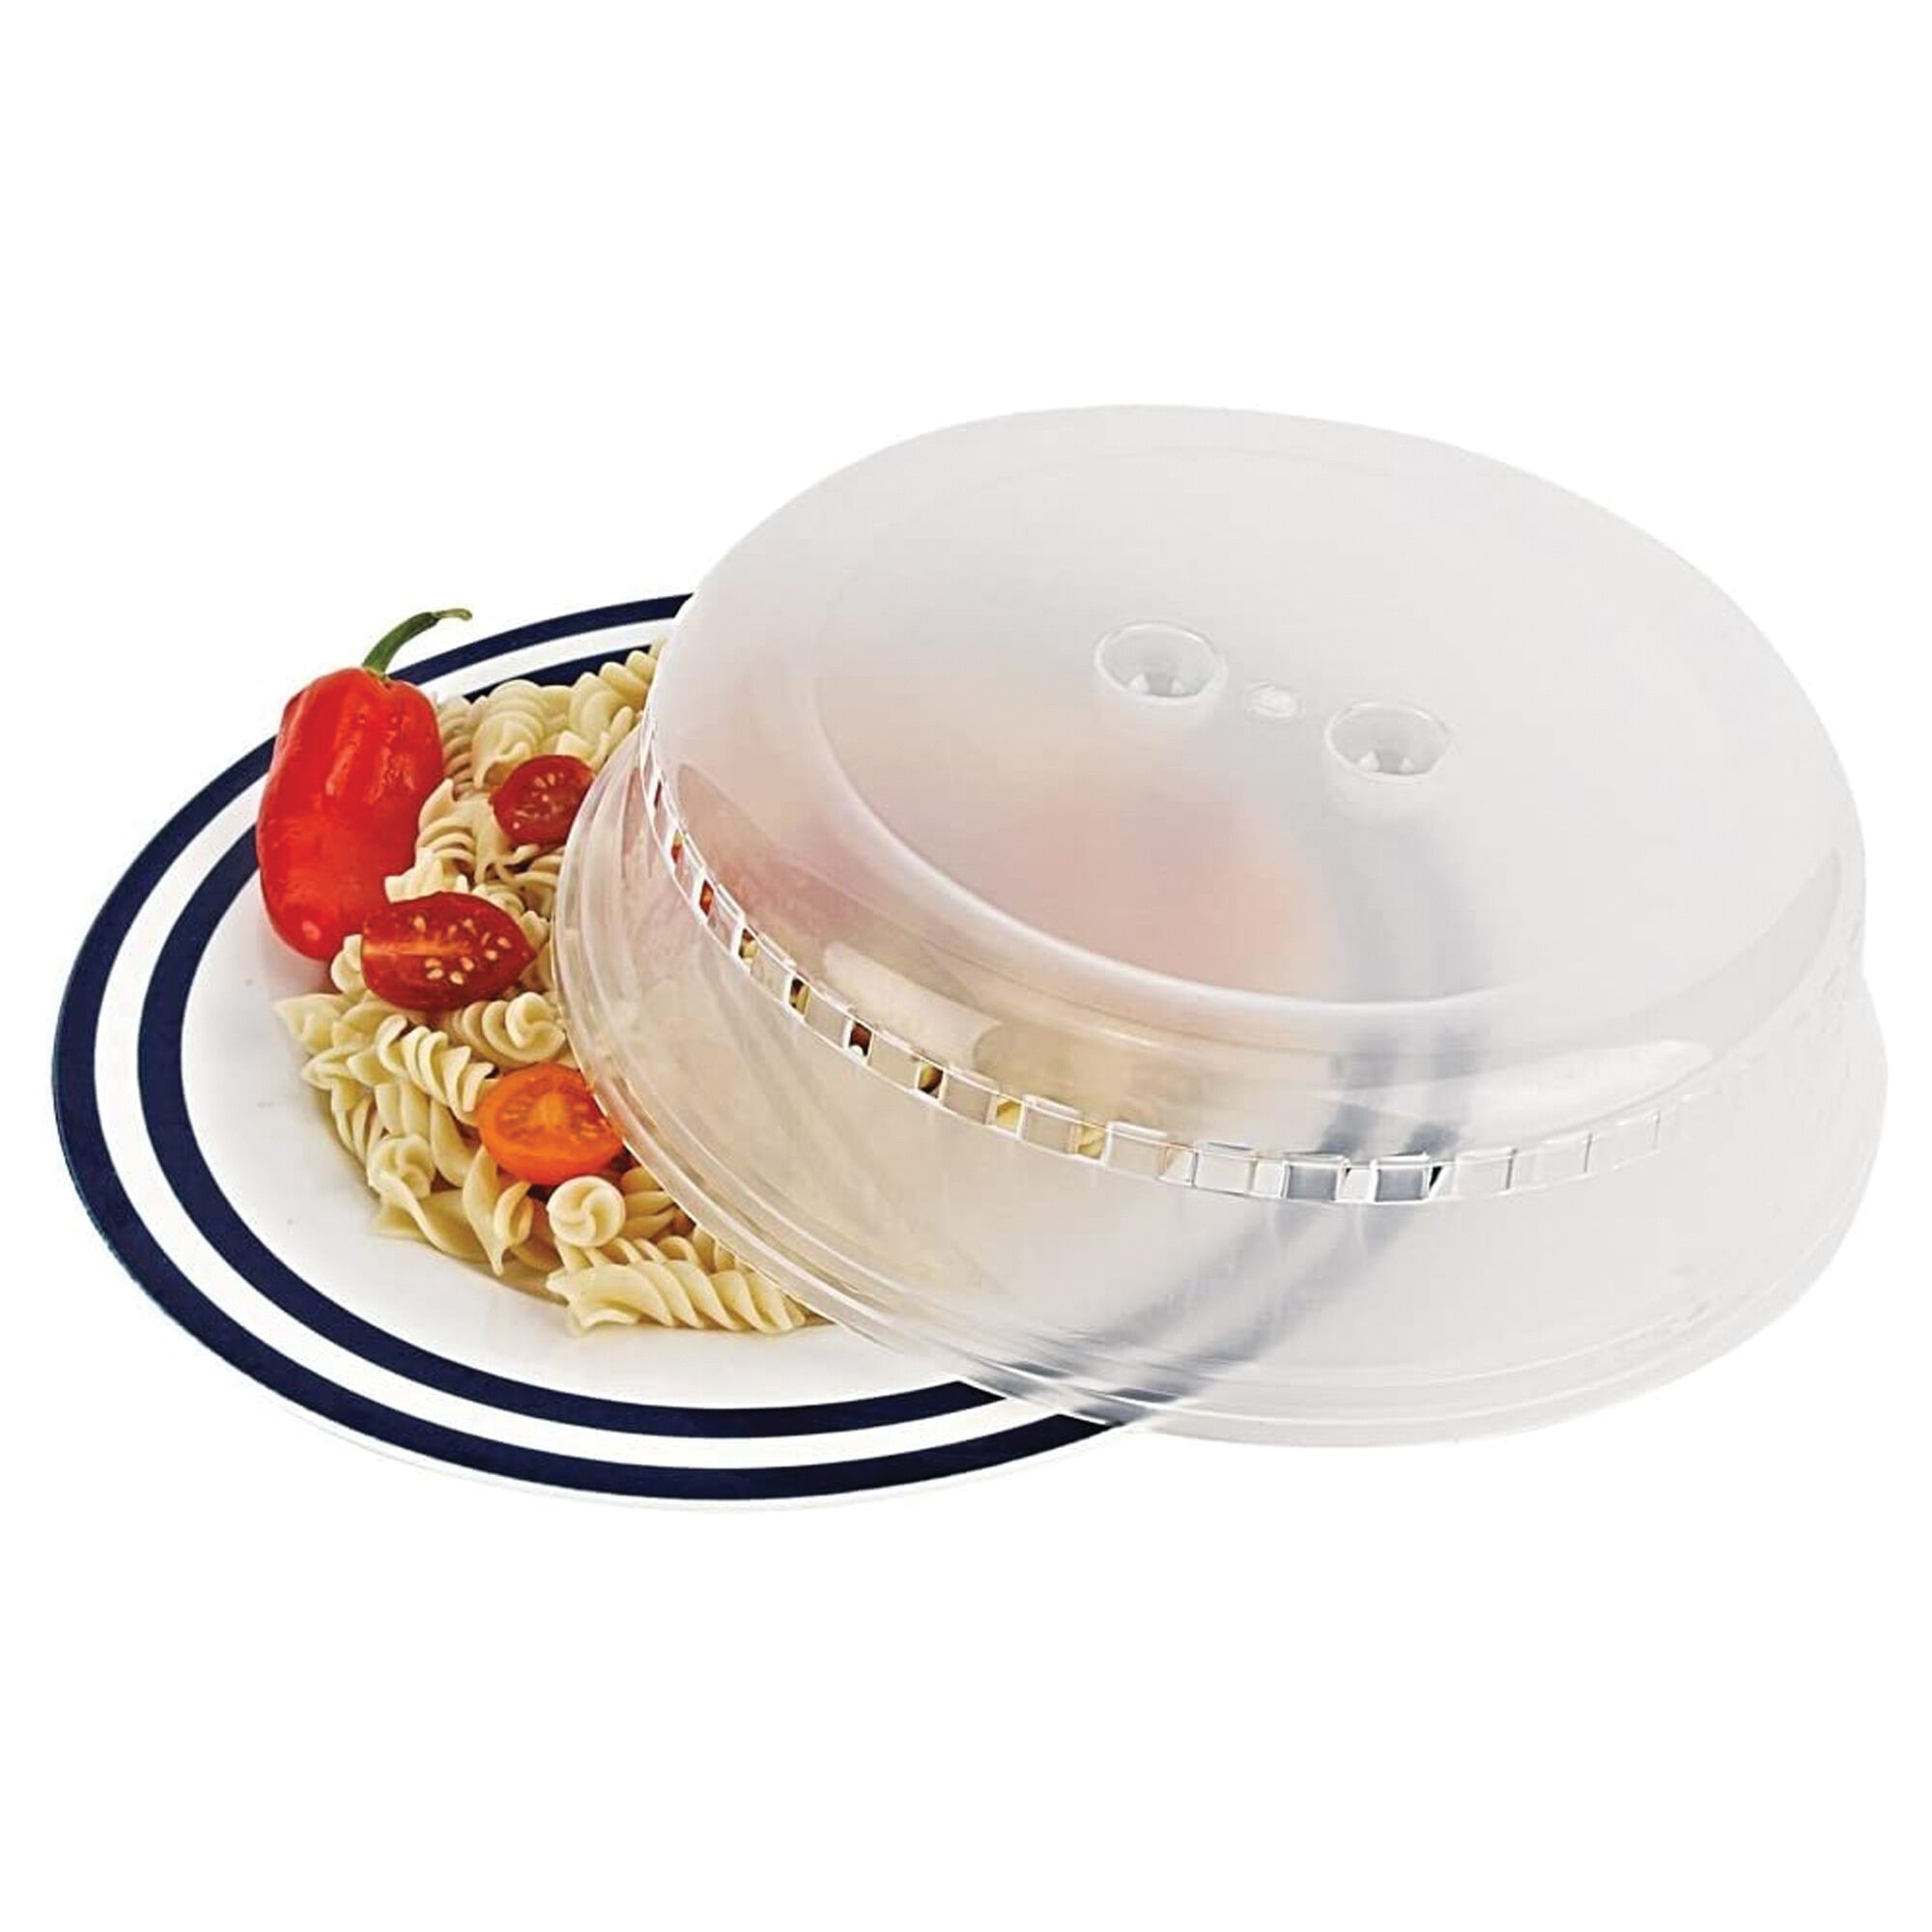 1 magnetic microwave food cover, microwave splash cover, clear